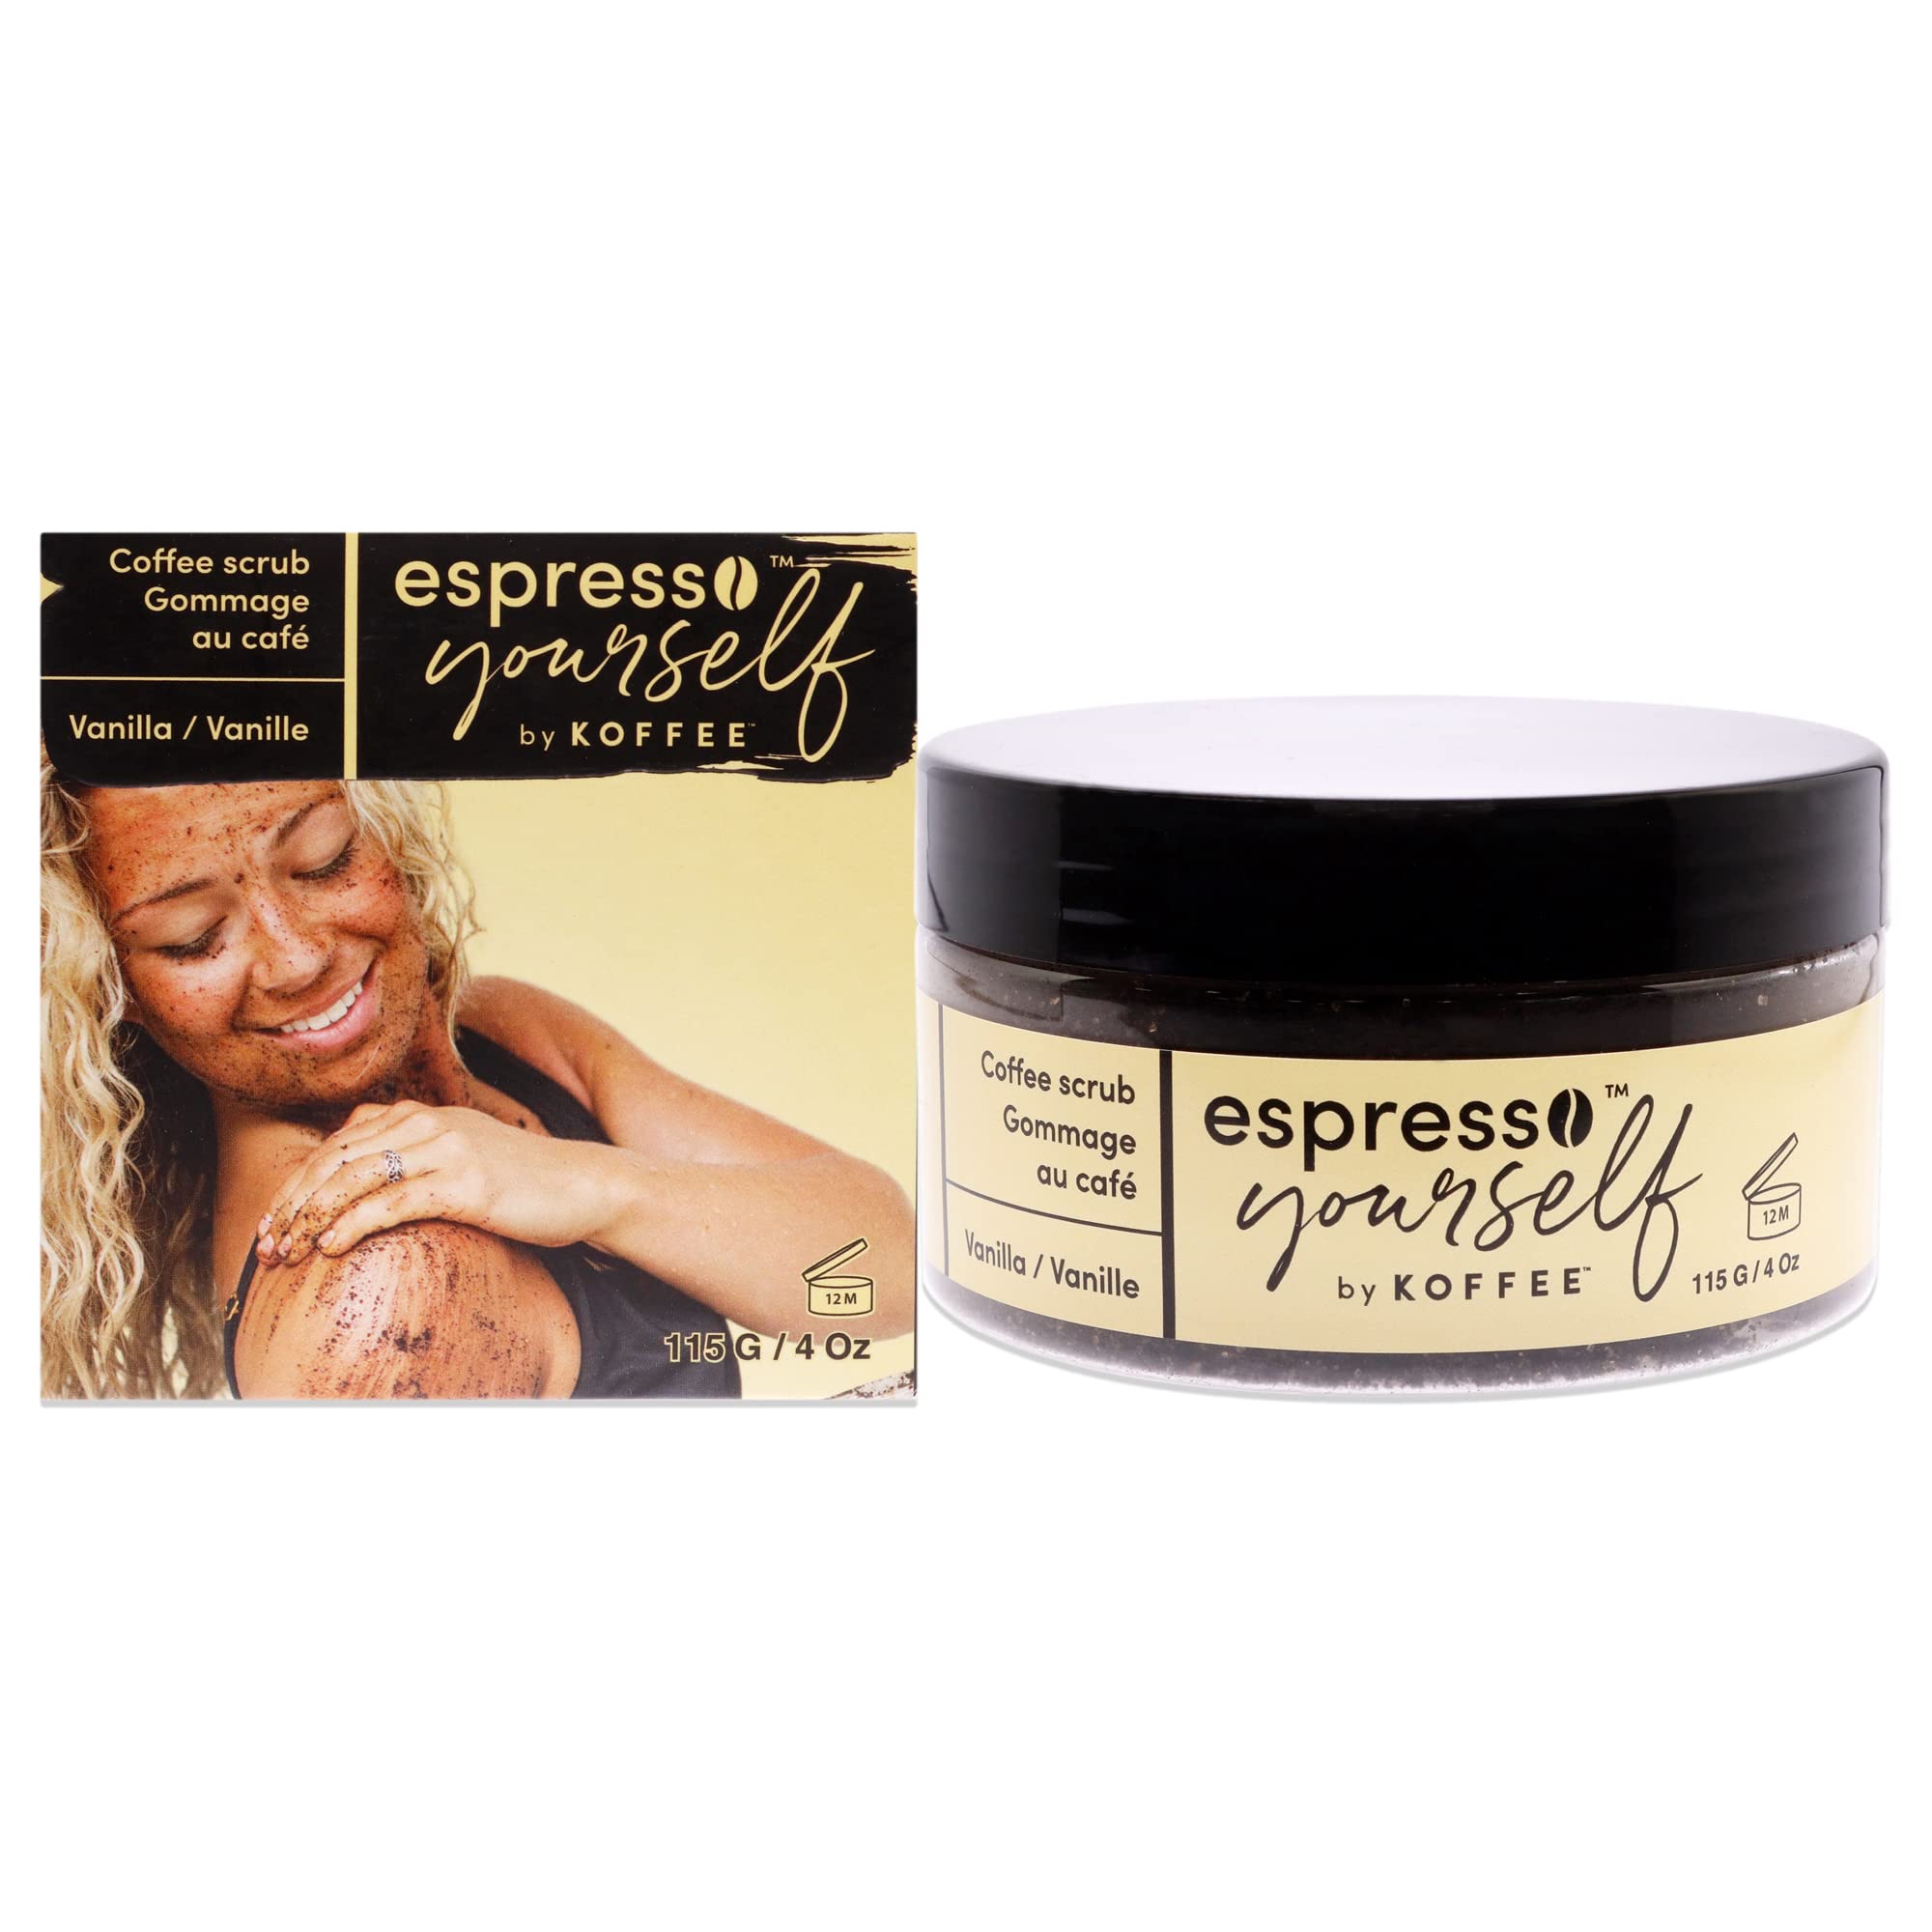 Koffee Beauty Vanilla Coffee Scrub - Exfoliating Body And Face Scrub - Polish And Smooth Skin with Ease - Invigorate Senses with Vanilla Fragrance Formula - Natural Treatment for Cellulite - 115 g